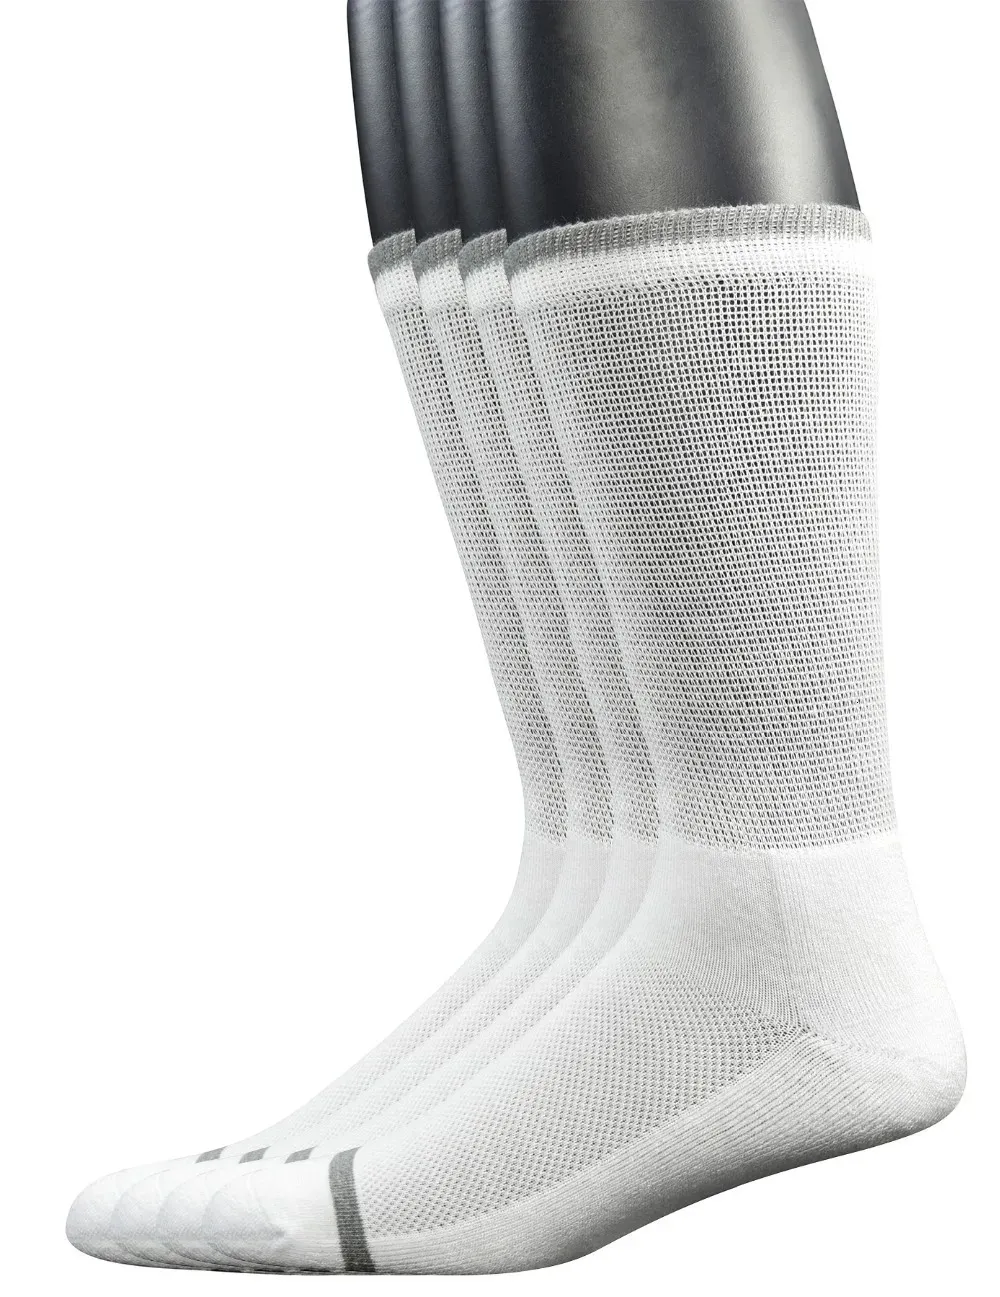 Mens 4 Pairs Bamboo Diabetic Crew Socks with Seamless Toe and Cushion Sole240401